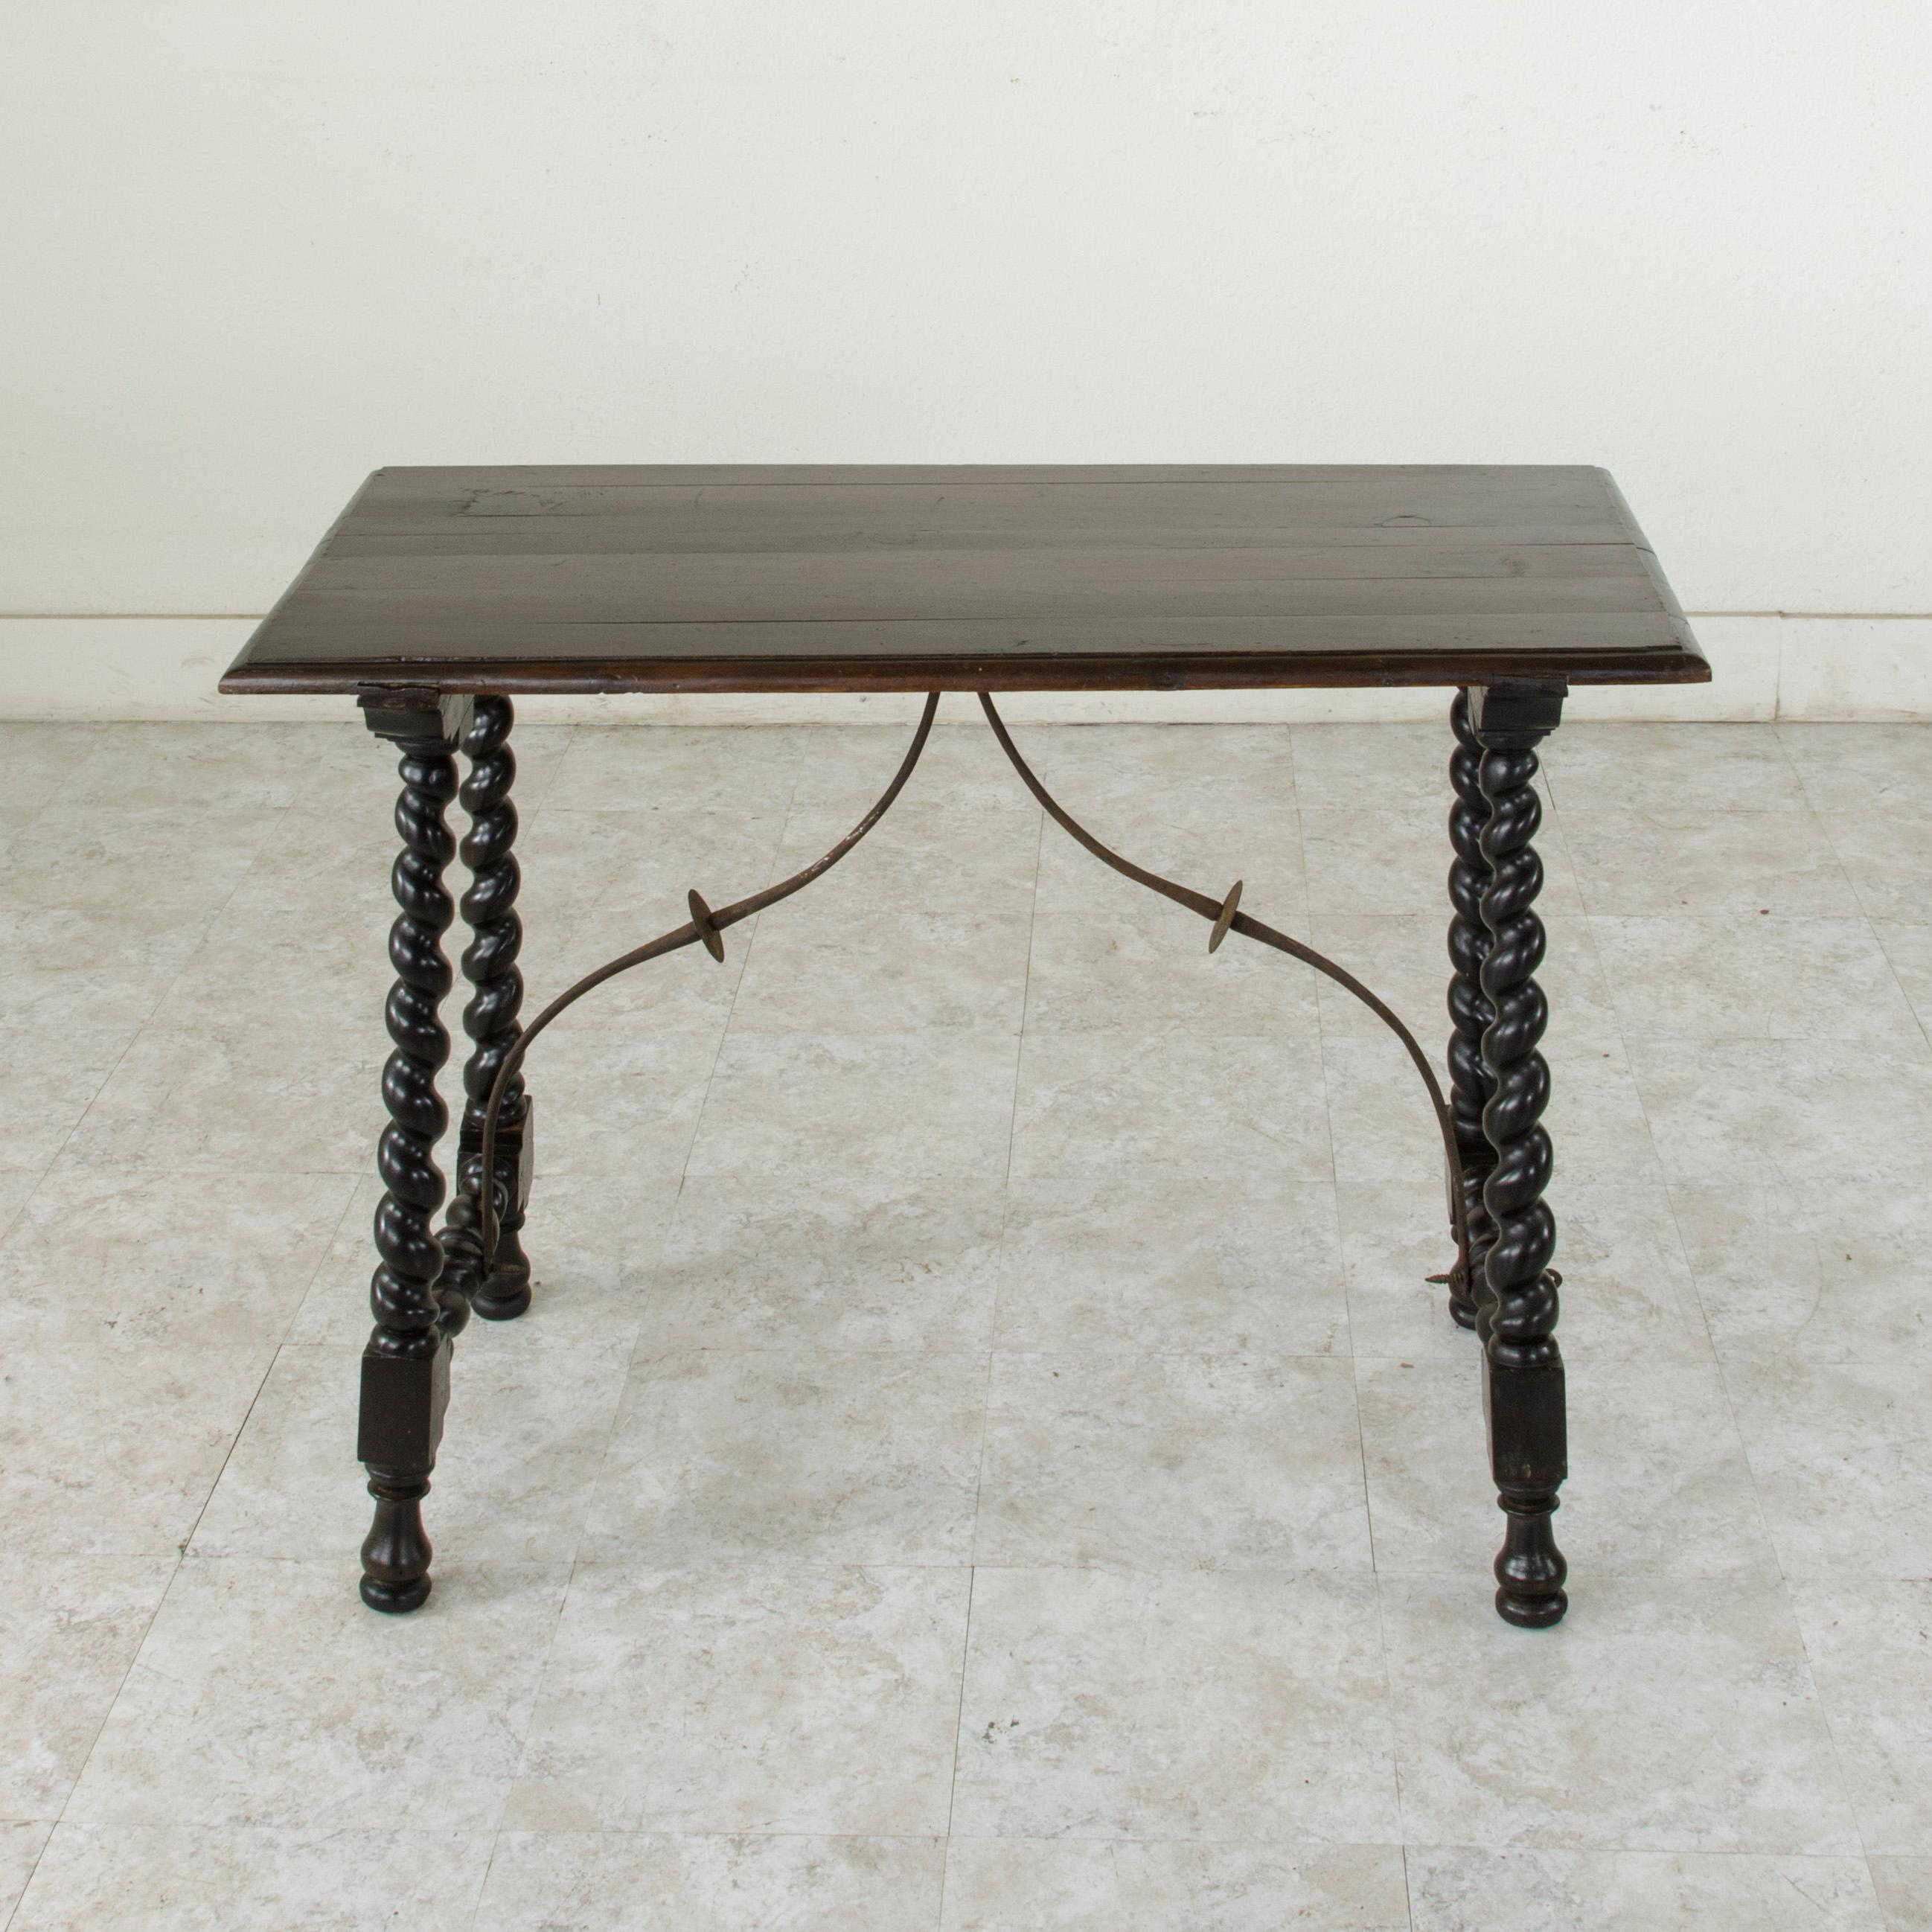 This mid-18th century Renaissance style walnut console table from Spain features hand-turned barley twist legs joined by an iron stretcher that provides additional stability. Its 19th century beveled top joins the hand pegged base by means of a